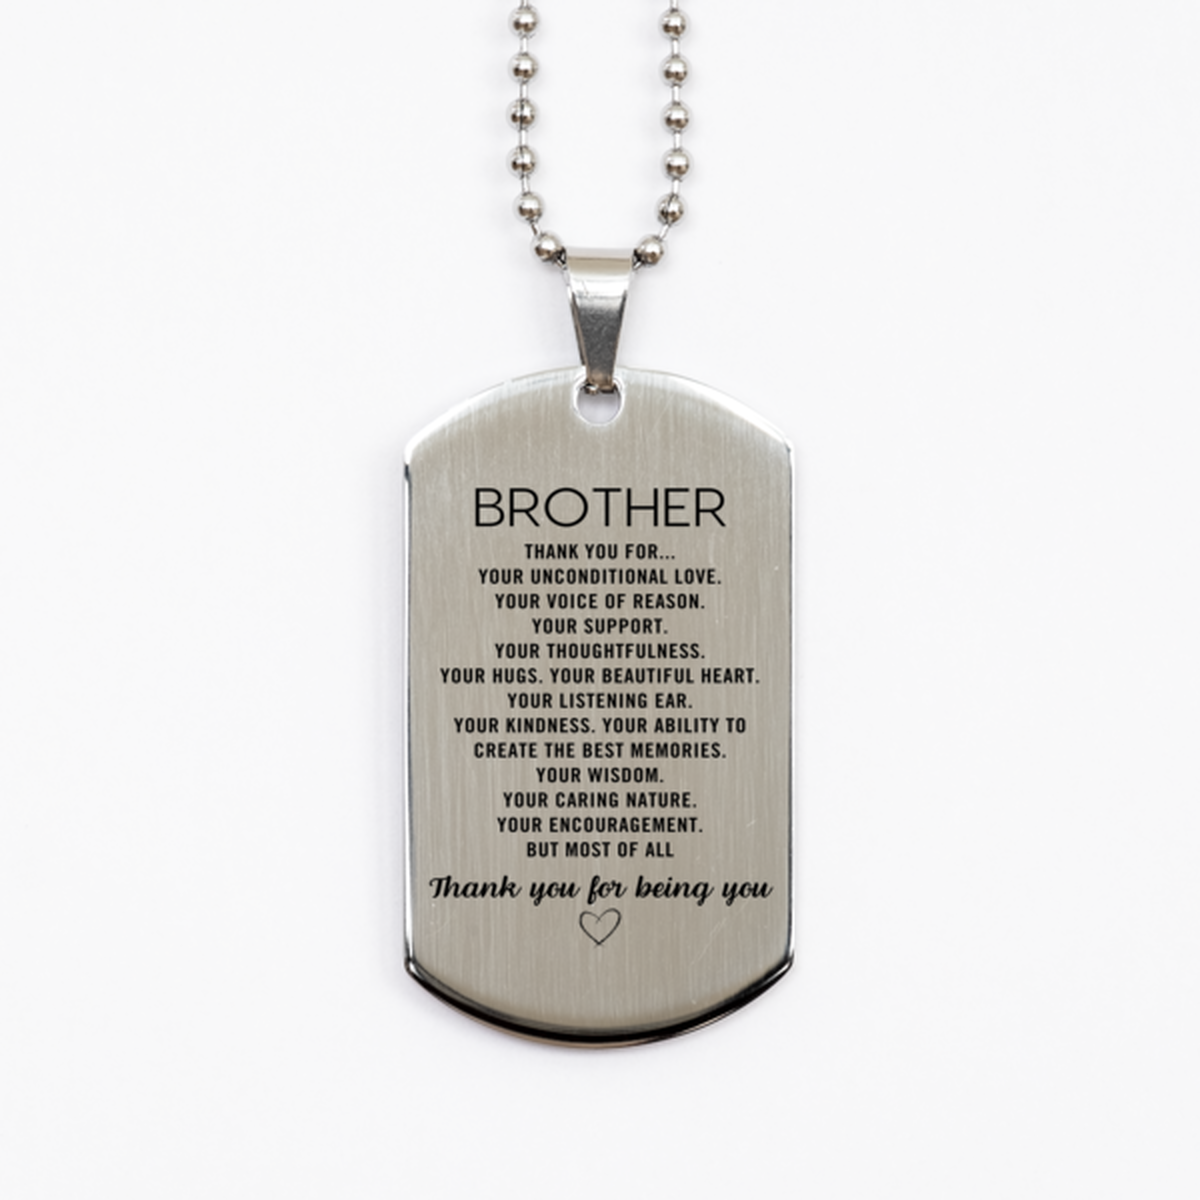 Brother Silver Dog Tag Custom, Engraved Gifts For Brother Christmas Graduation Birthday Gifts for Men Women Brother Thank you for Your unconditional love